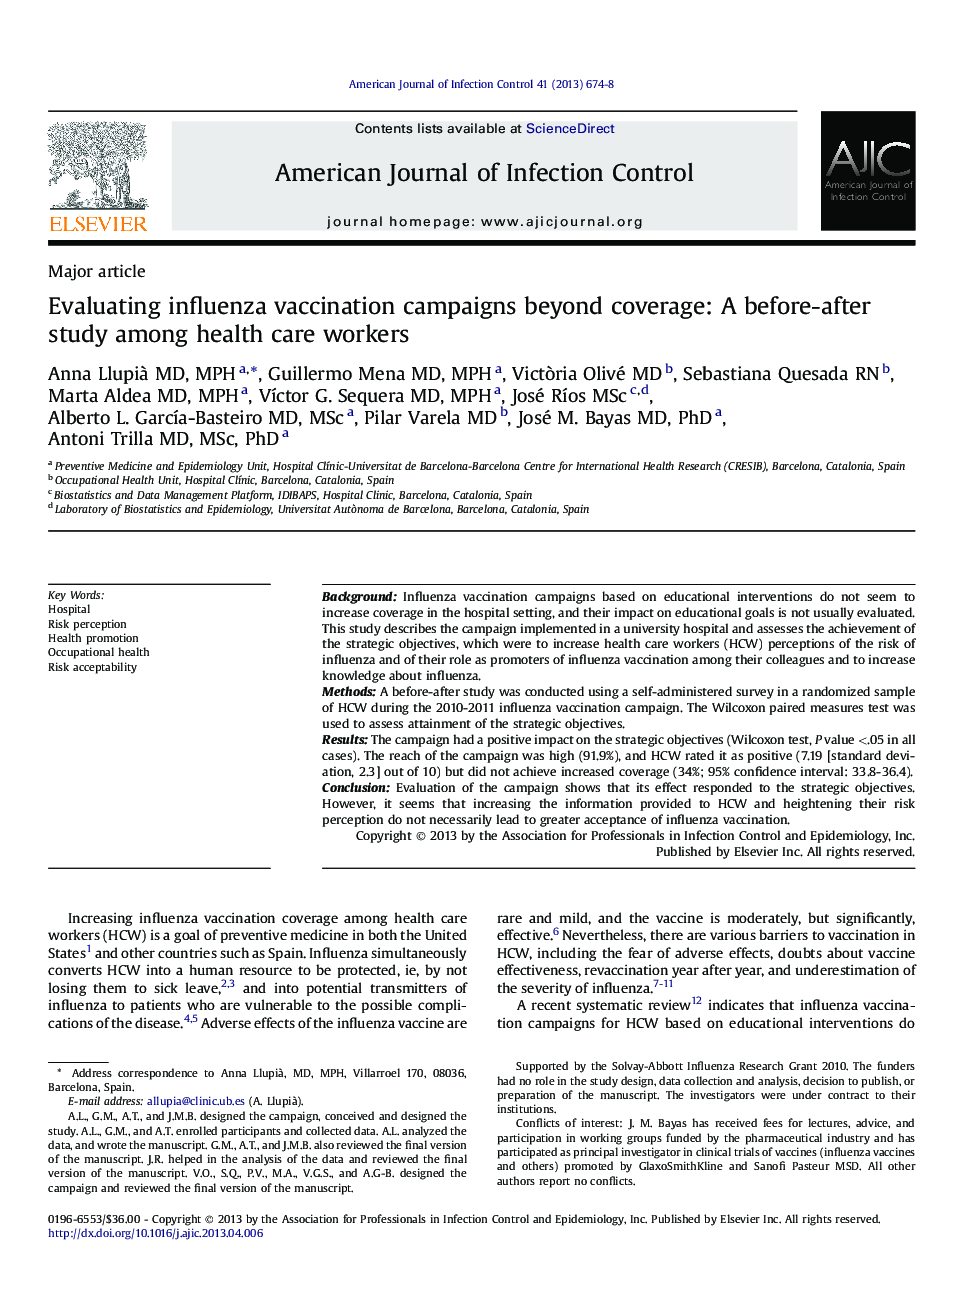 Evaluating influenza vaccination campaigns beyond coverage: A before-after study among health care workers 